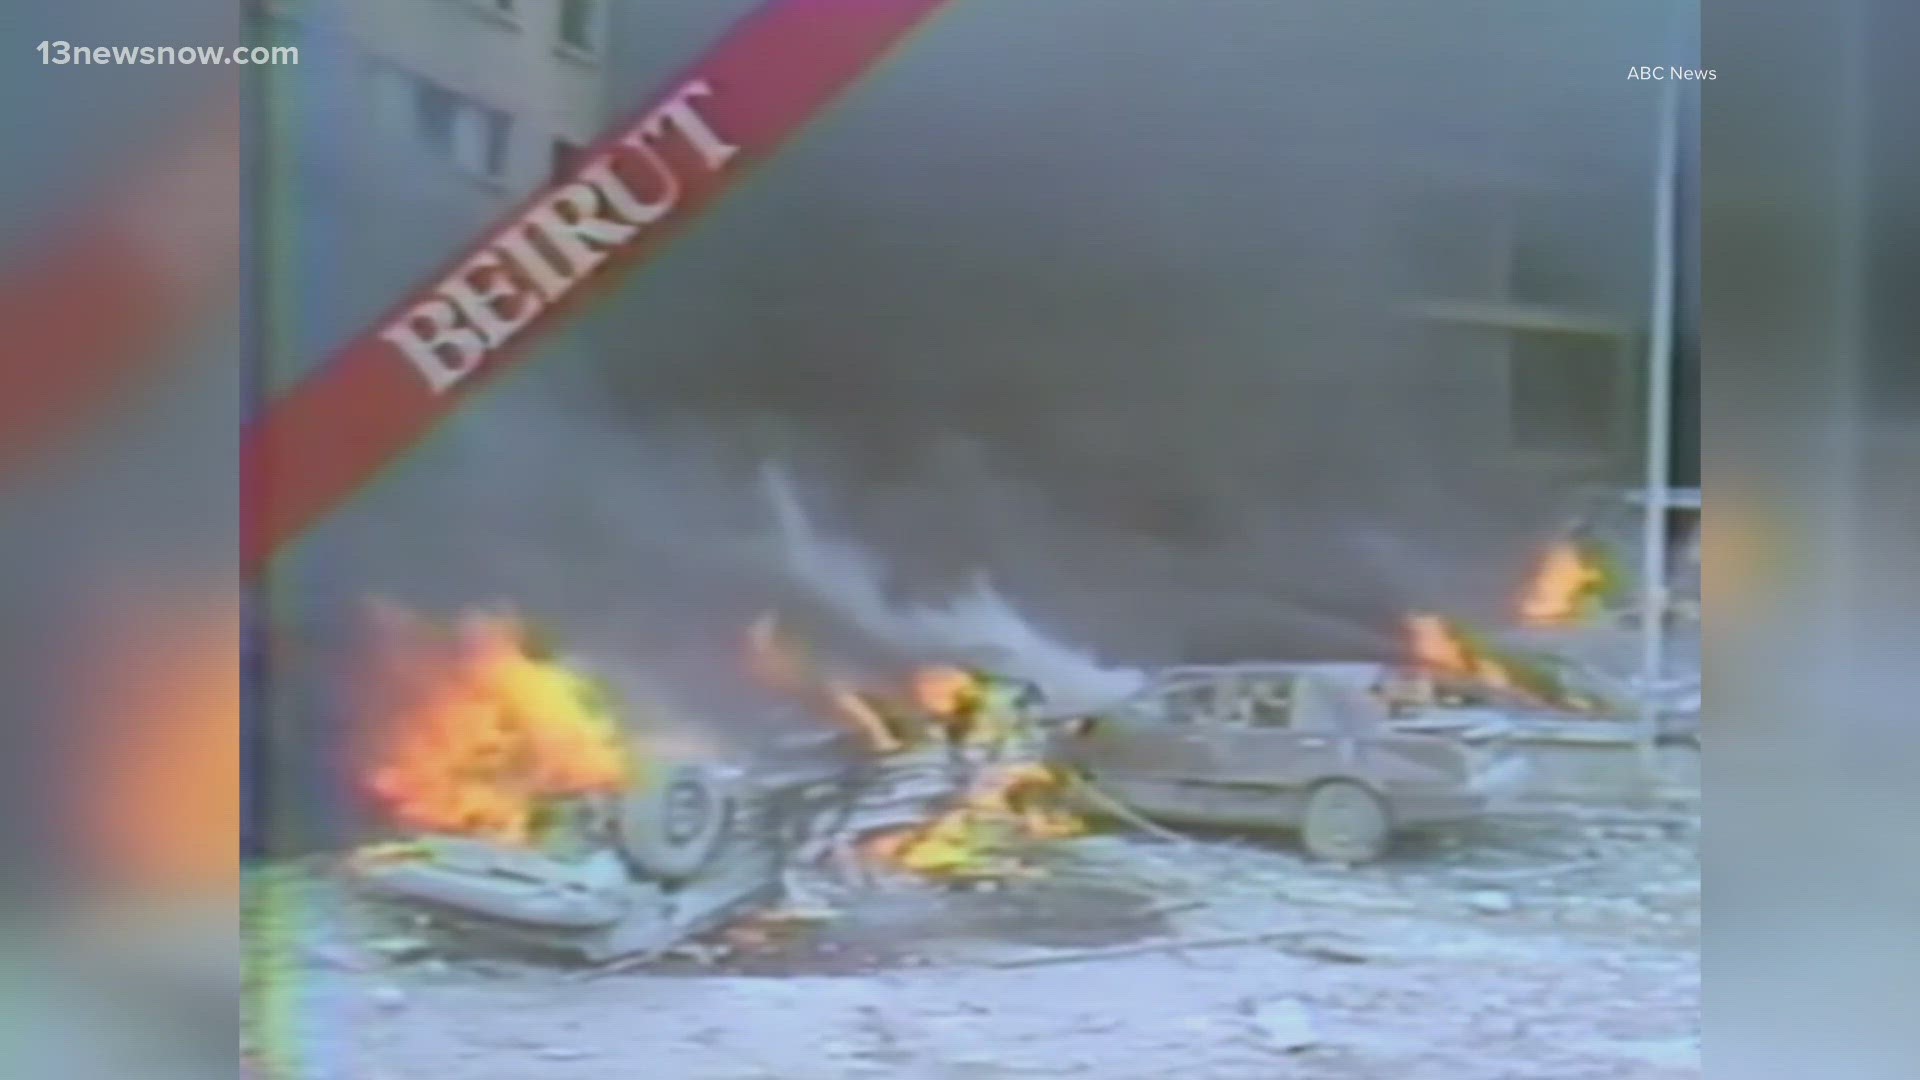 On October 23, 1983, 241 Americans died after bombs detonated at U.S. barracks in Beirut, Lebanon.